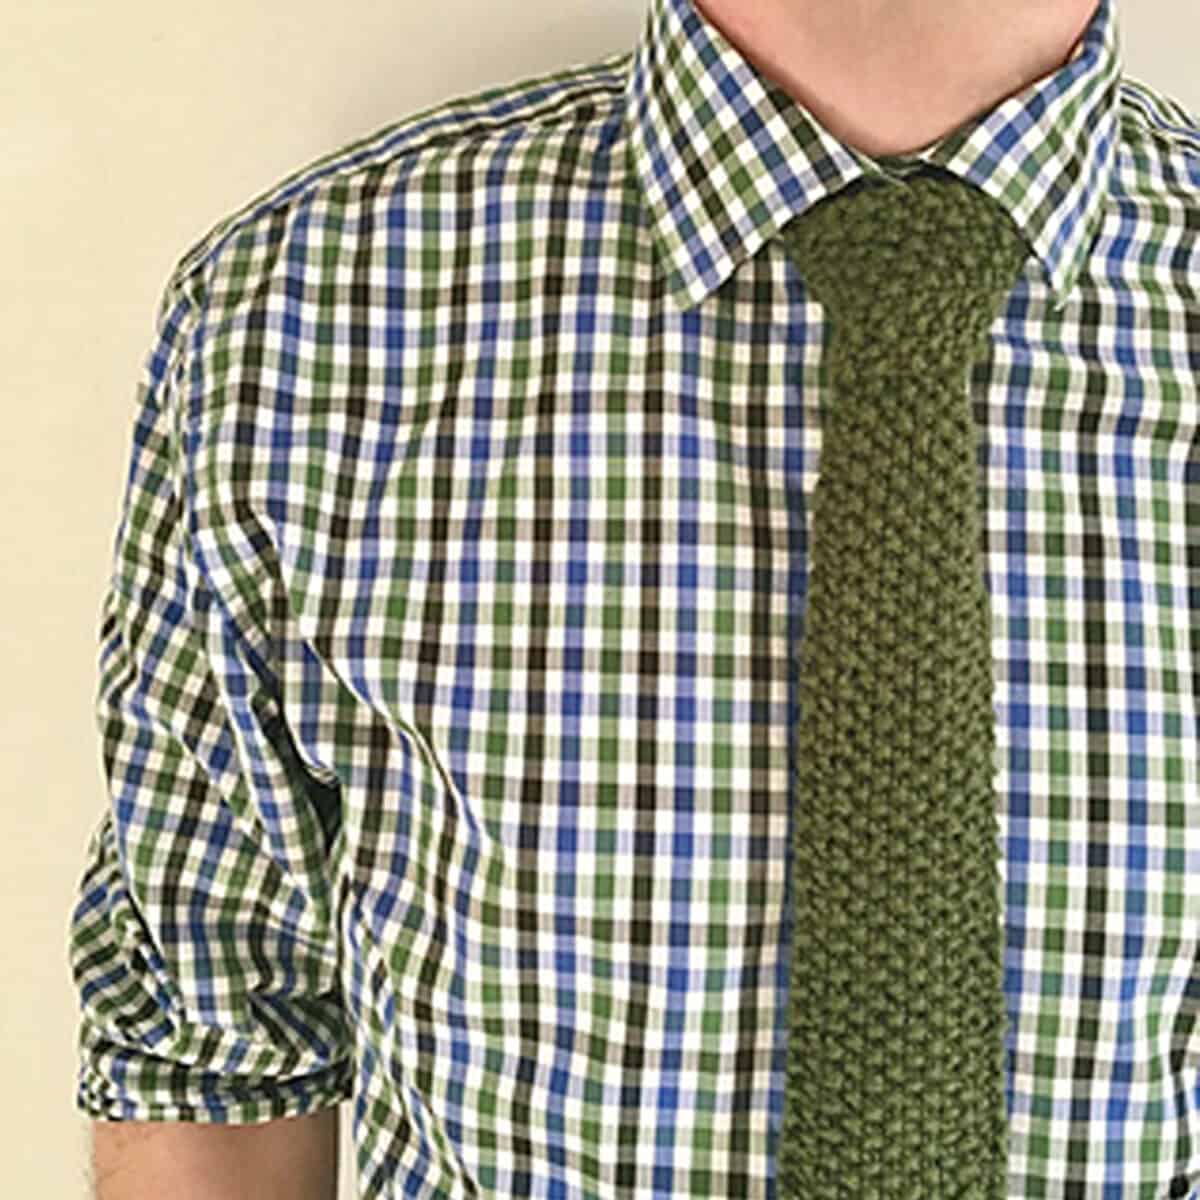 Knitted Necktie in seed stitch pattern with green yarn worn by a model in a checkered shirt.